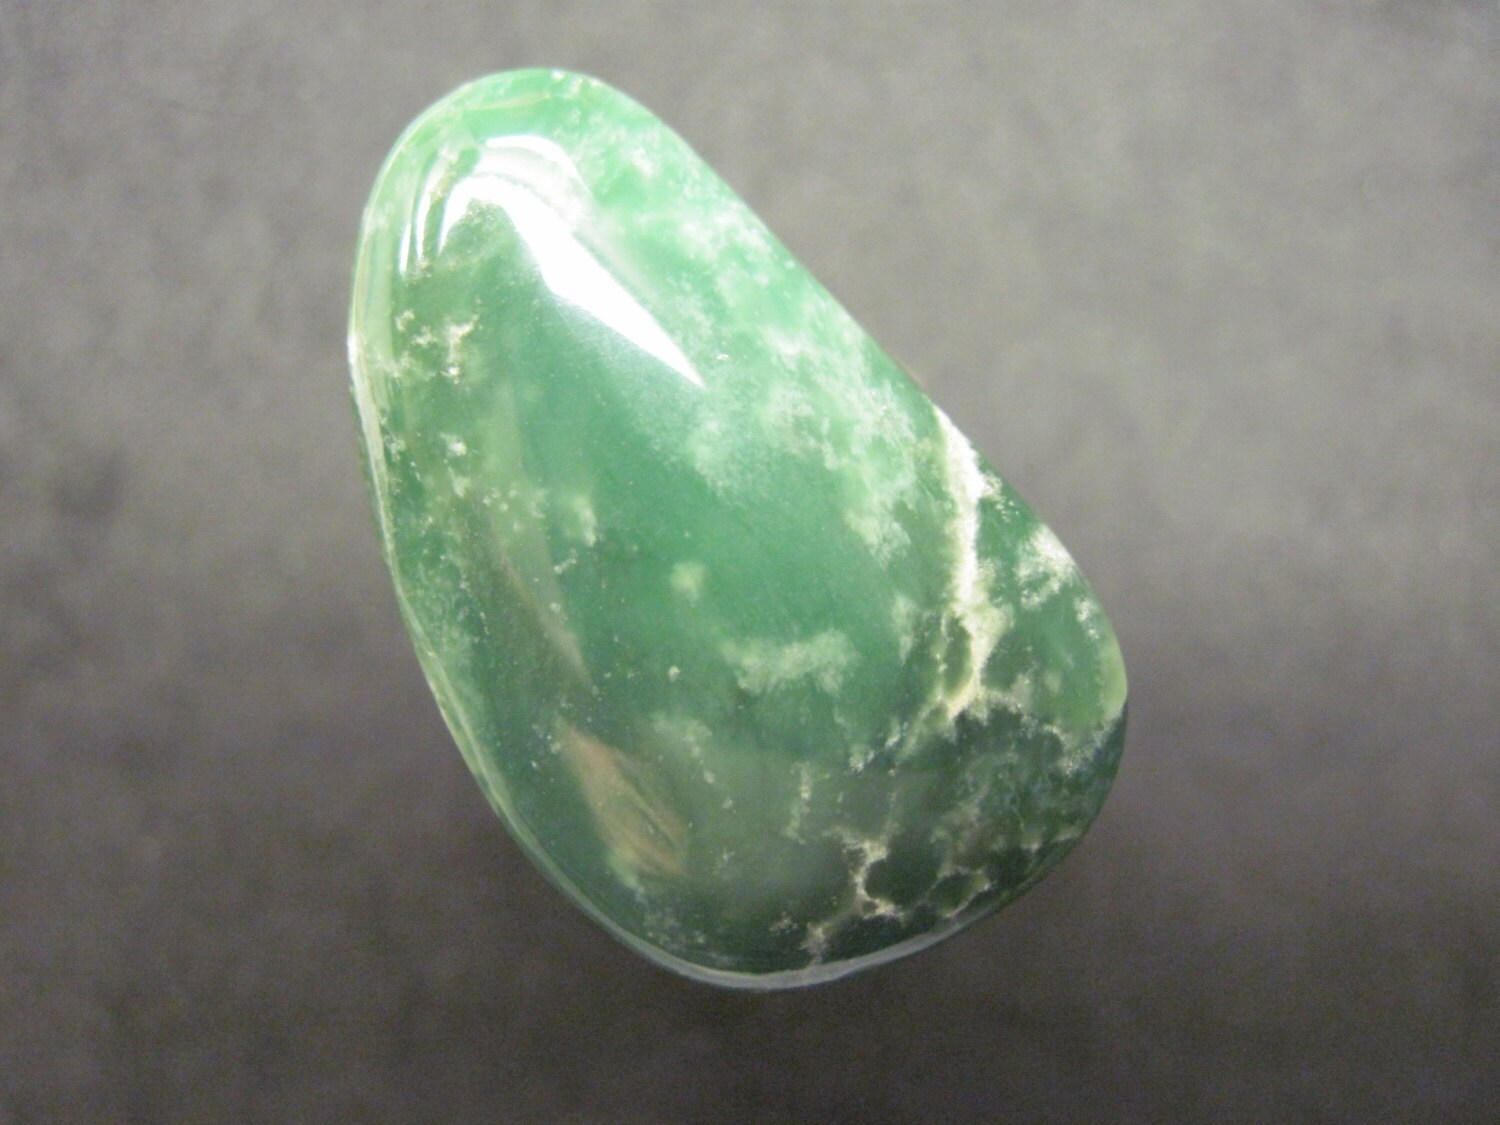 Variscite freeform stone cabochon by Redtailedhawk on Etsy